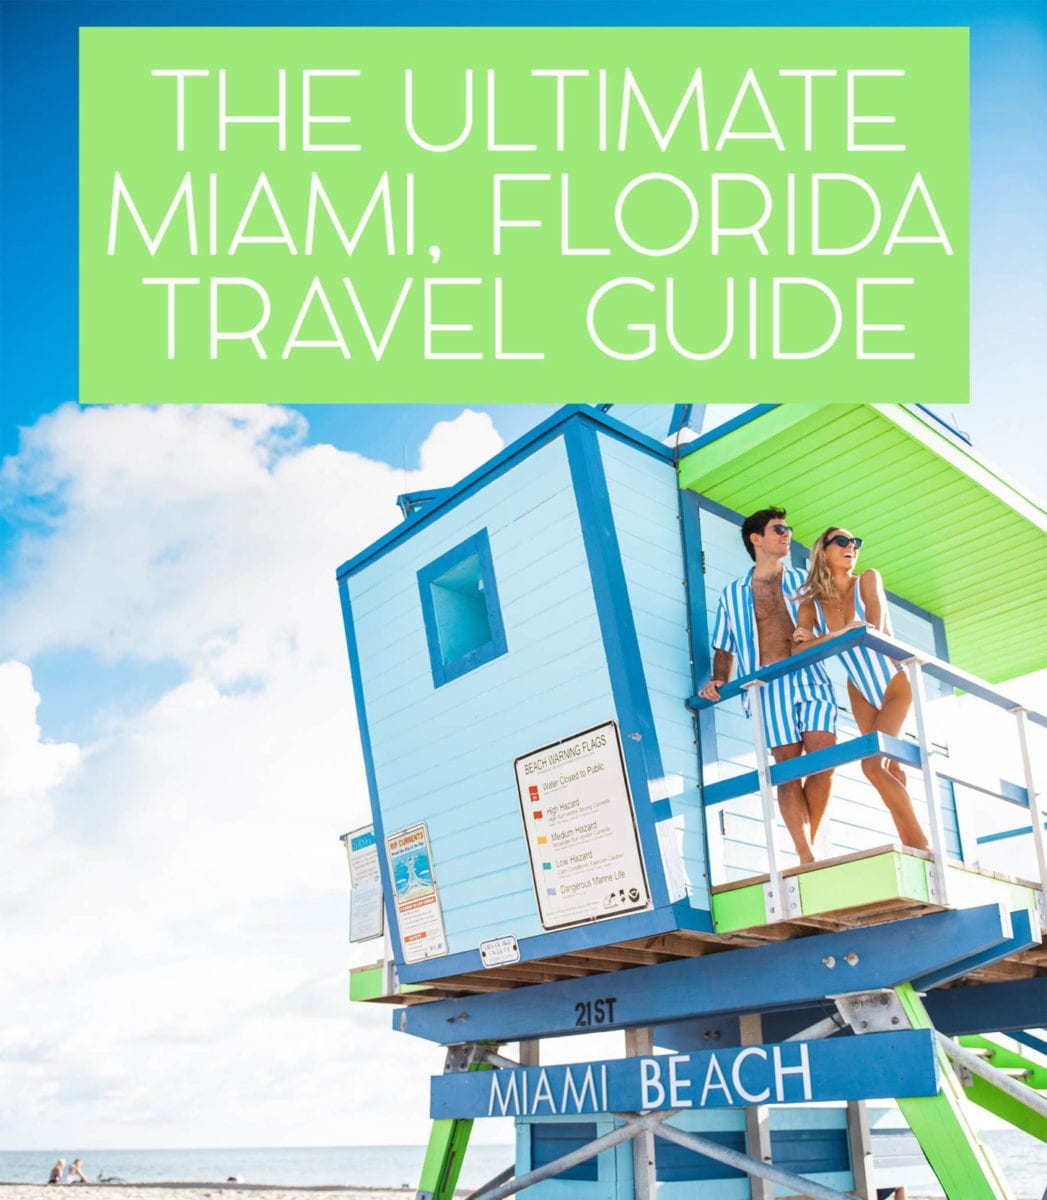 The Ultimate Miami Travel Guide the Jetset Guide to Miami & South